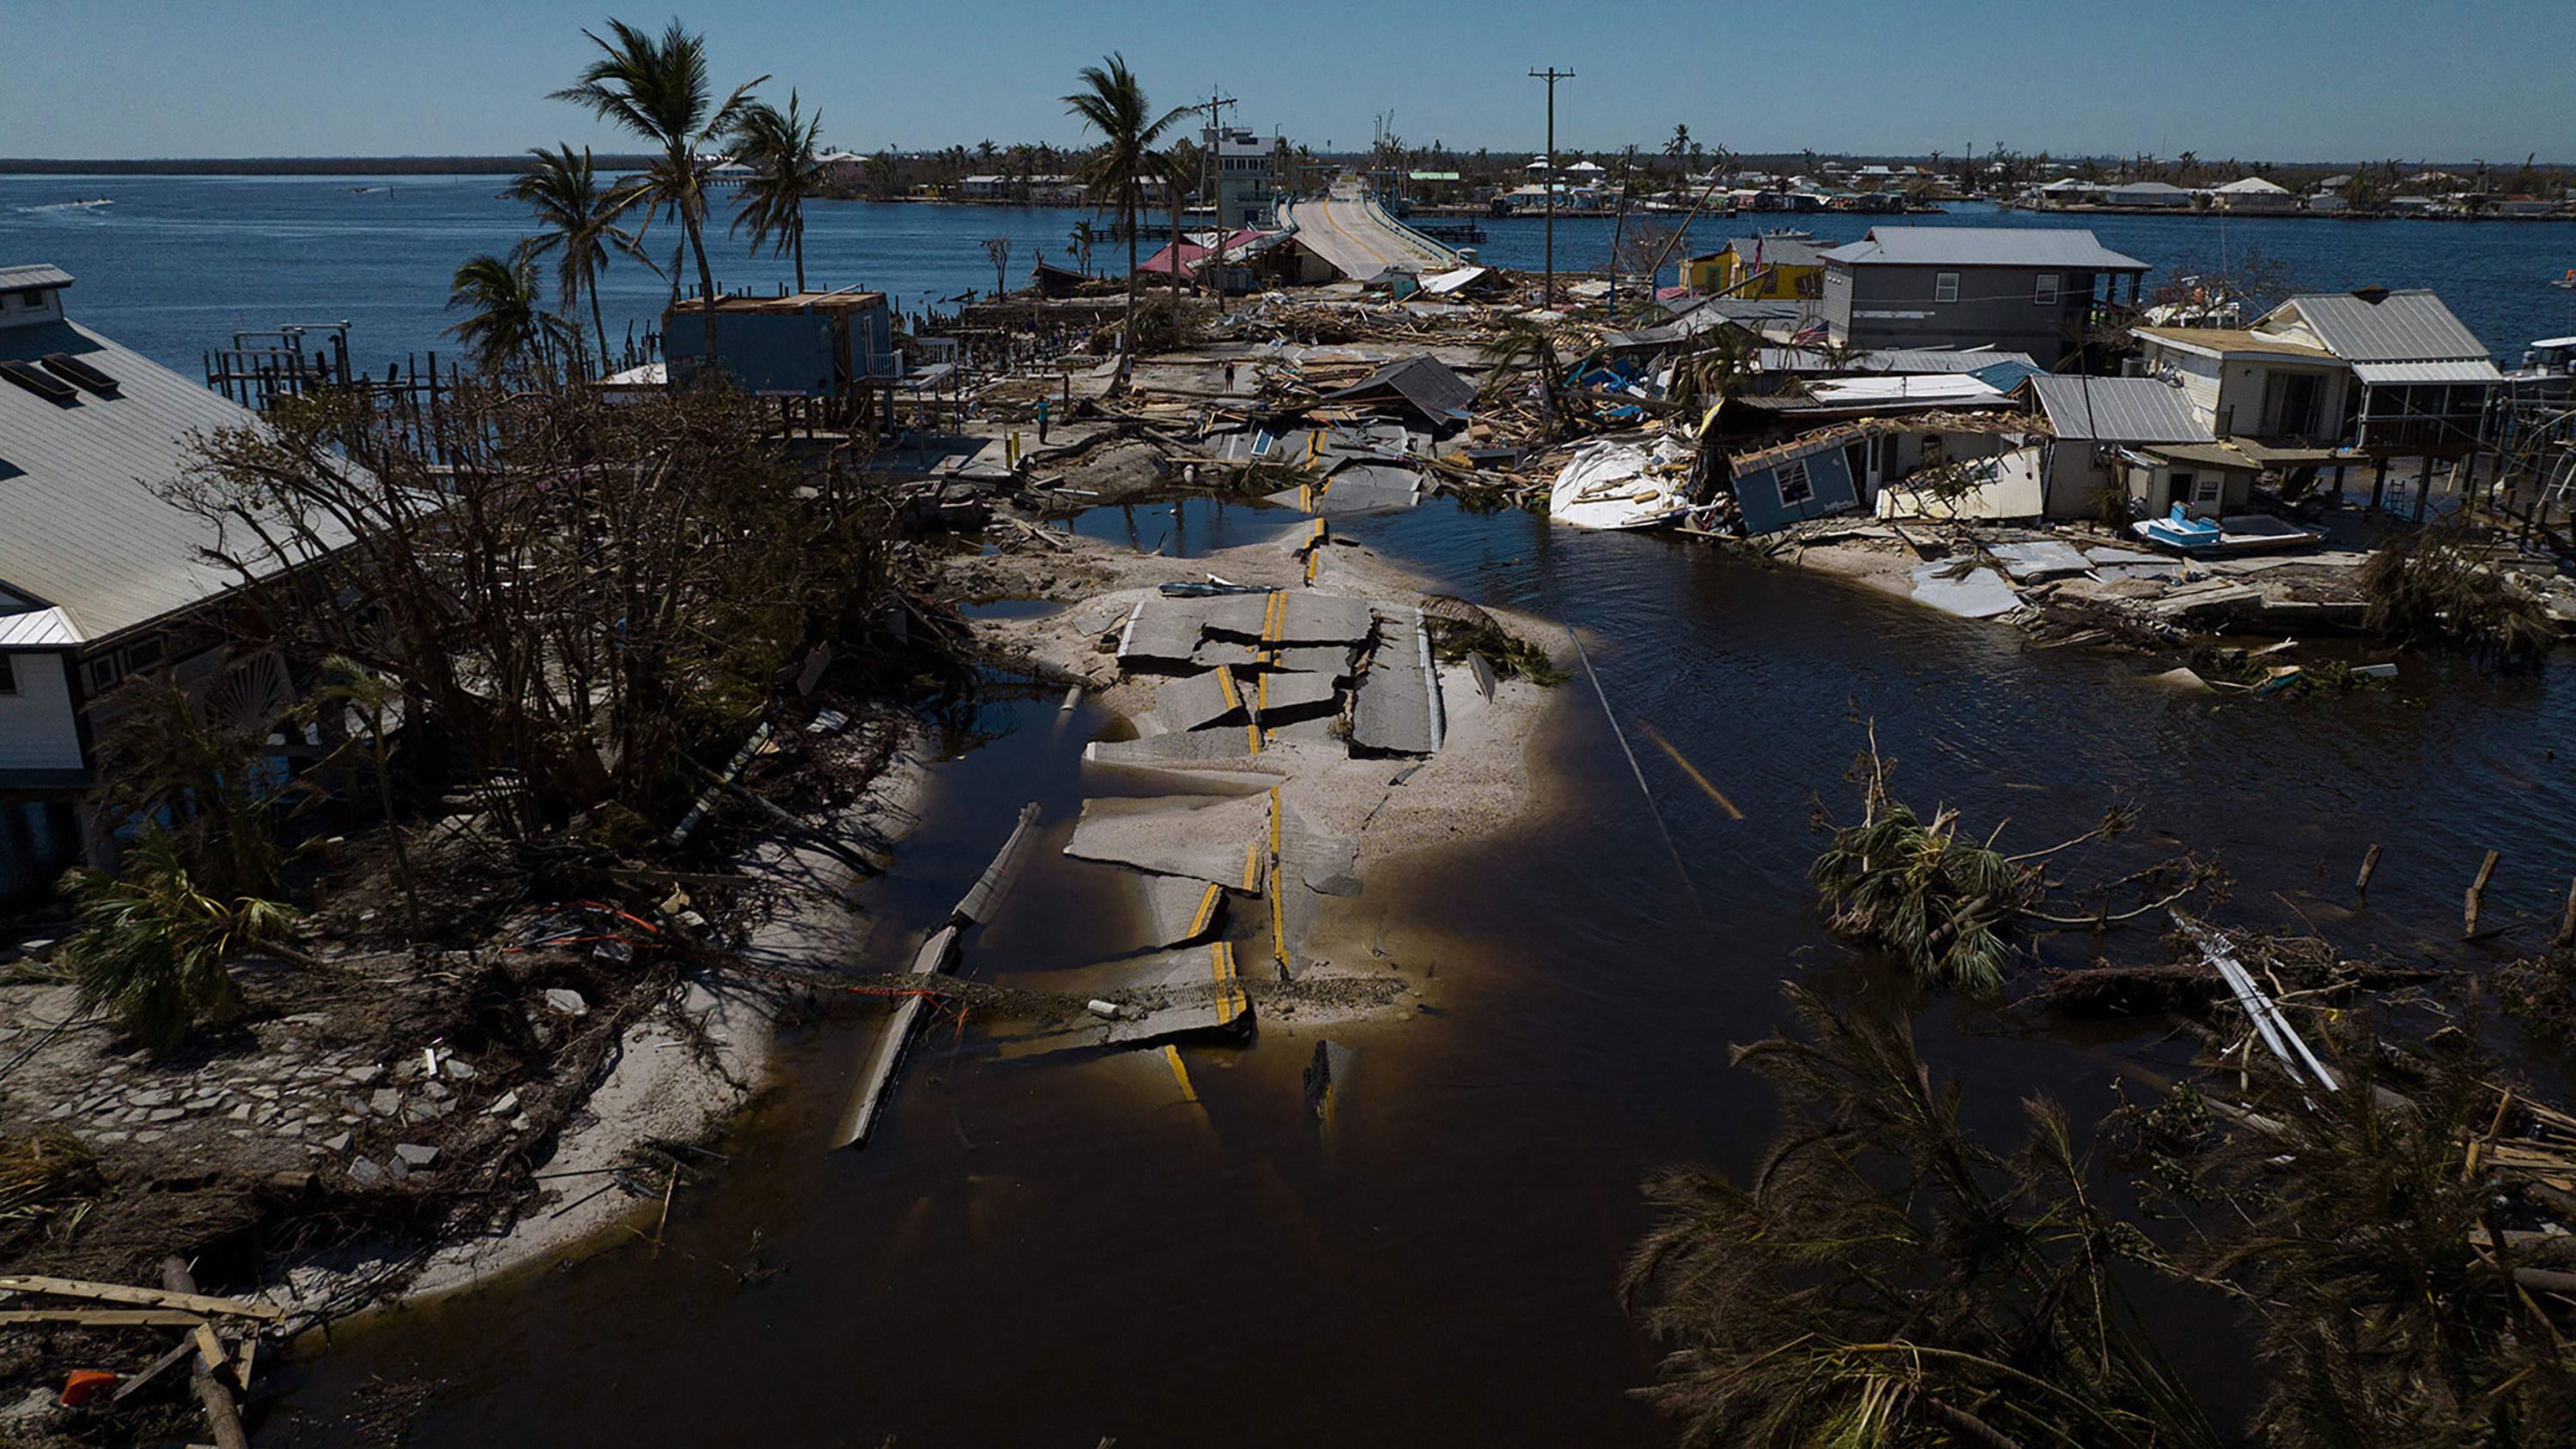 A broken section of road and destroyed houses are seen in the aftermath of <a href="https://www.cnn.com/2022/09/26/weather/gallery/hurricane-ian/index.html" target="_blank">Hurricane Ian</a> in Matlacha, Florida, on Saturday, October 1.